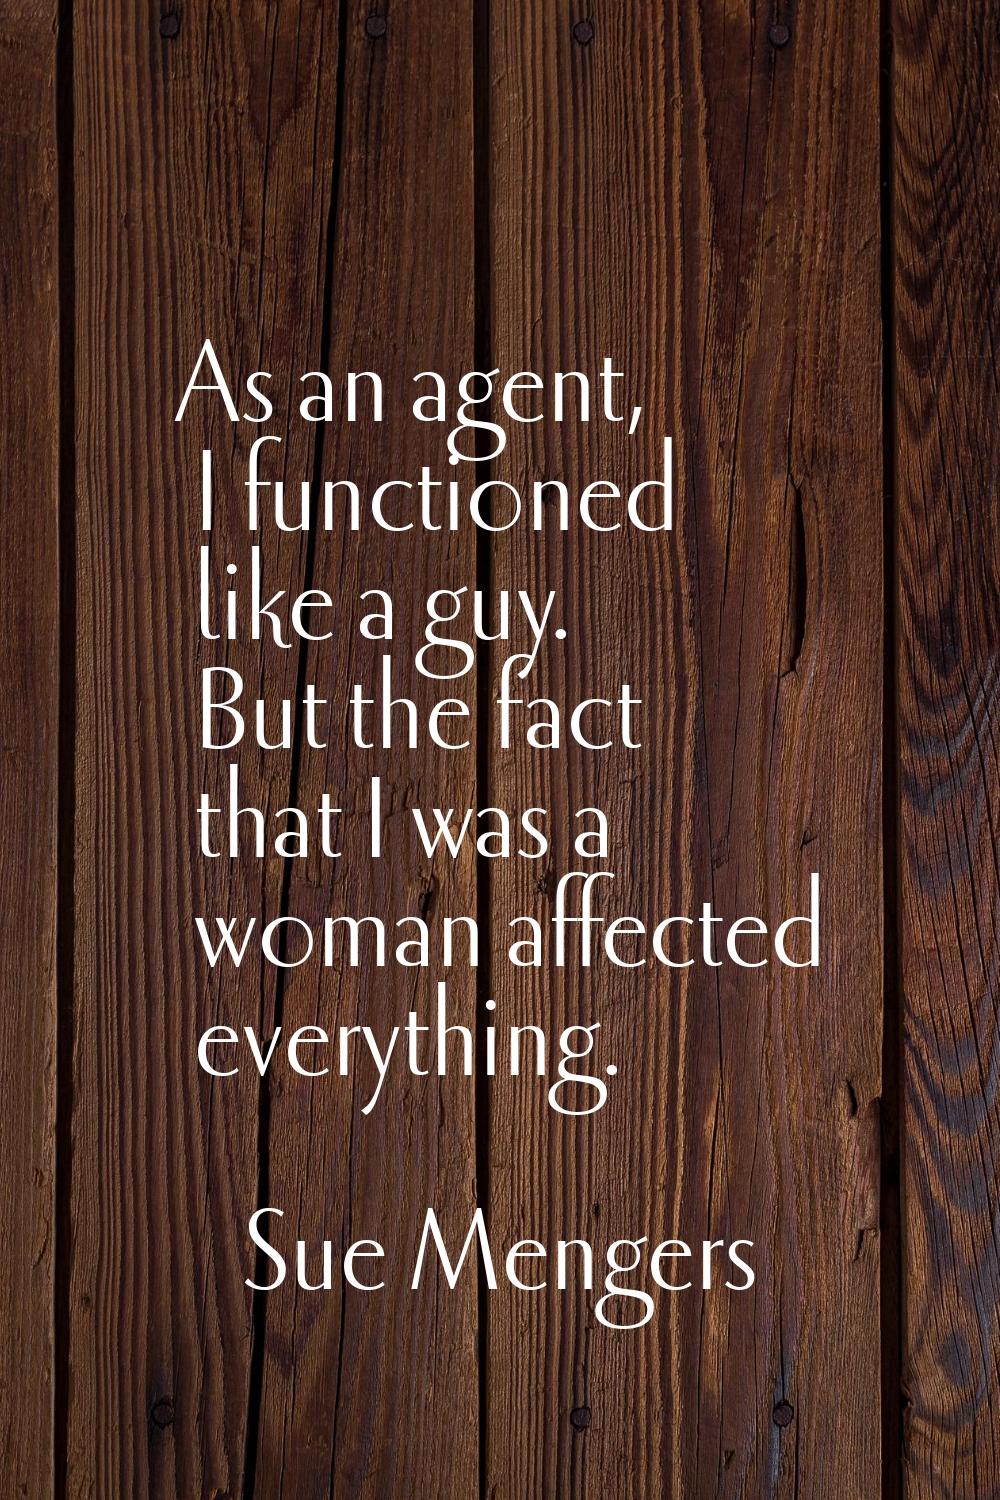 As an agent, I functioned like a guy. But the fact that I was a woman affected everything.